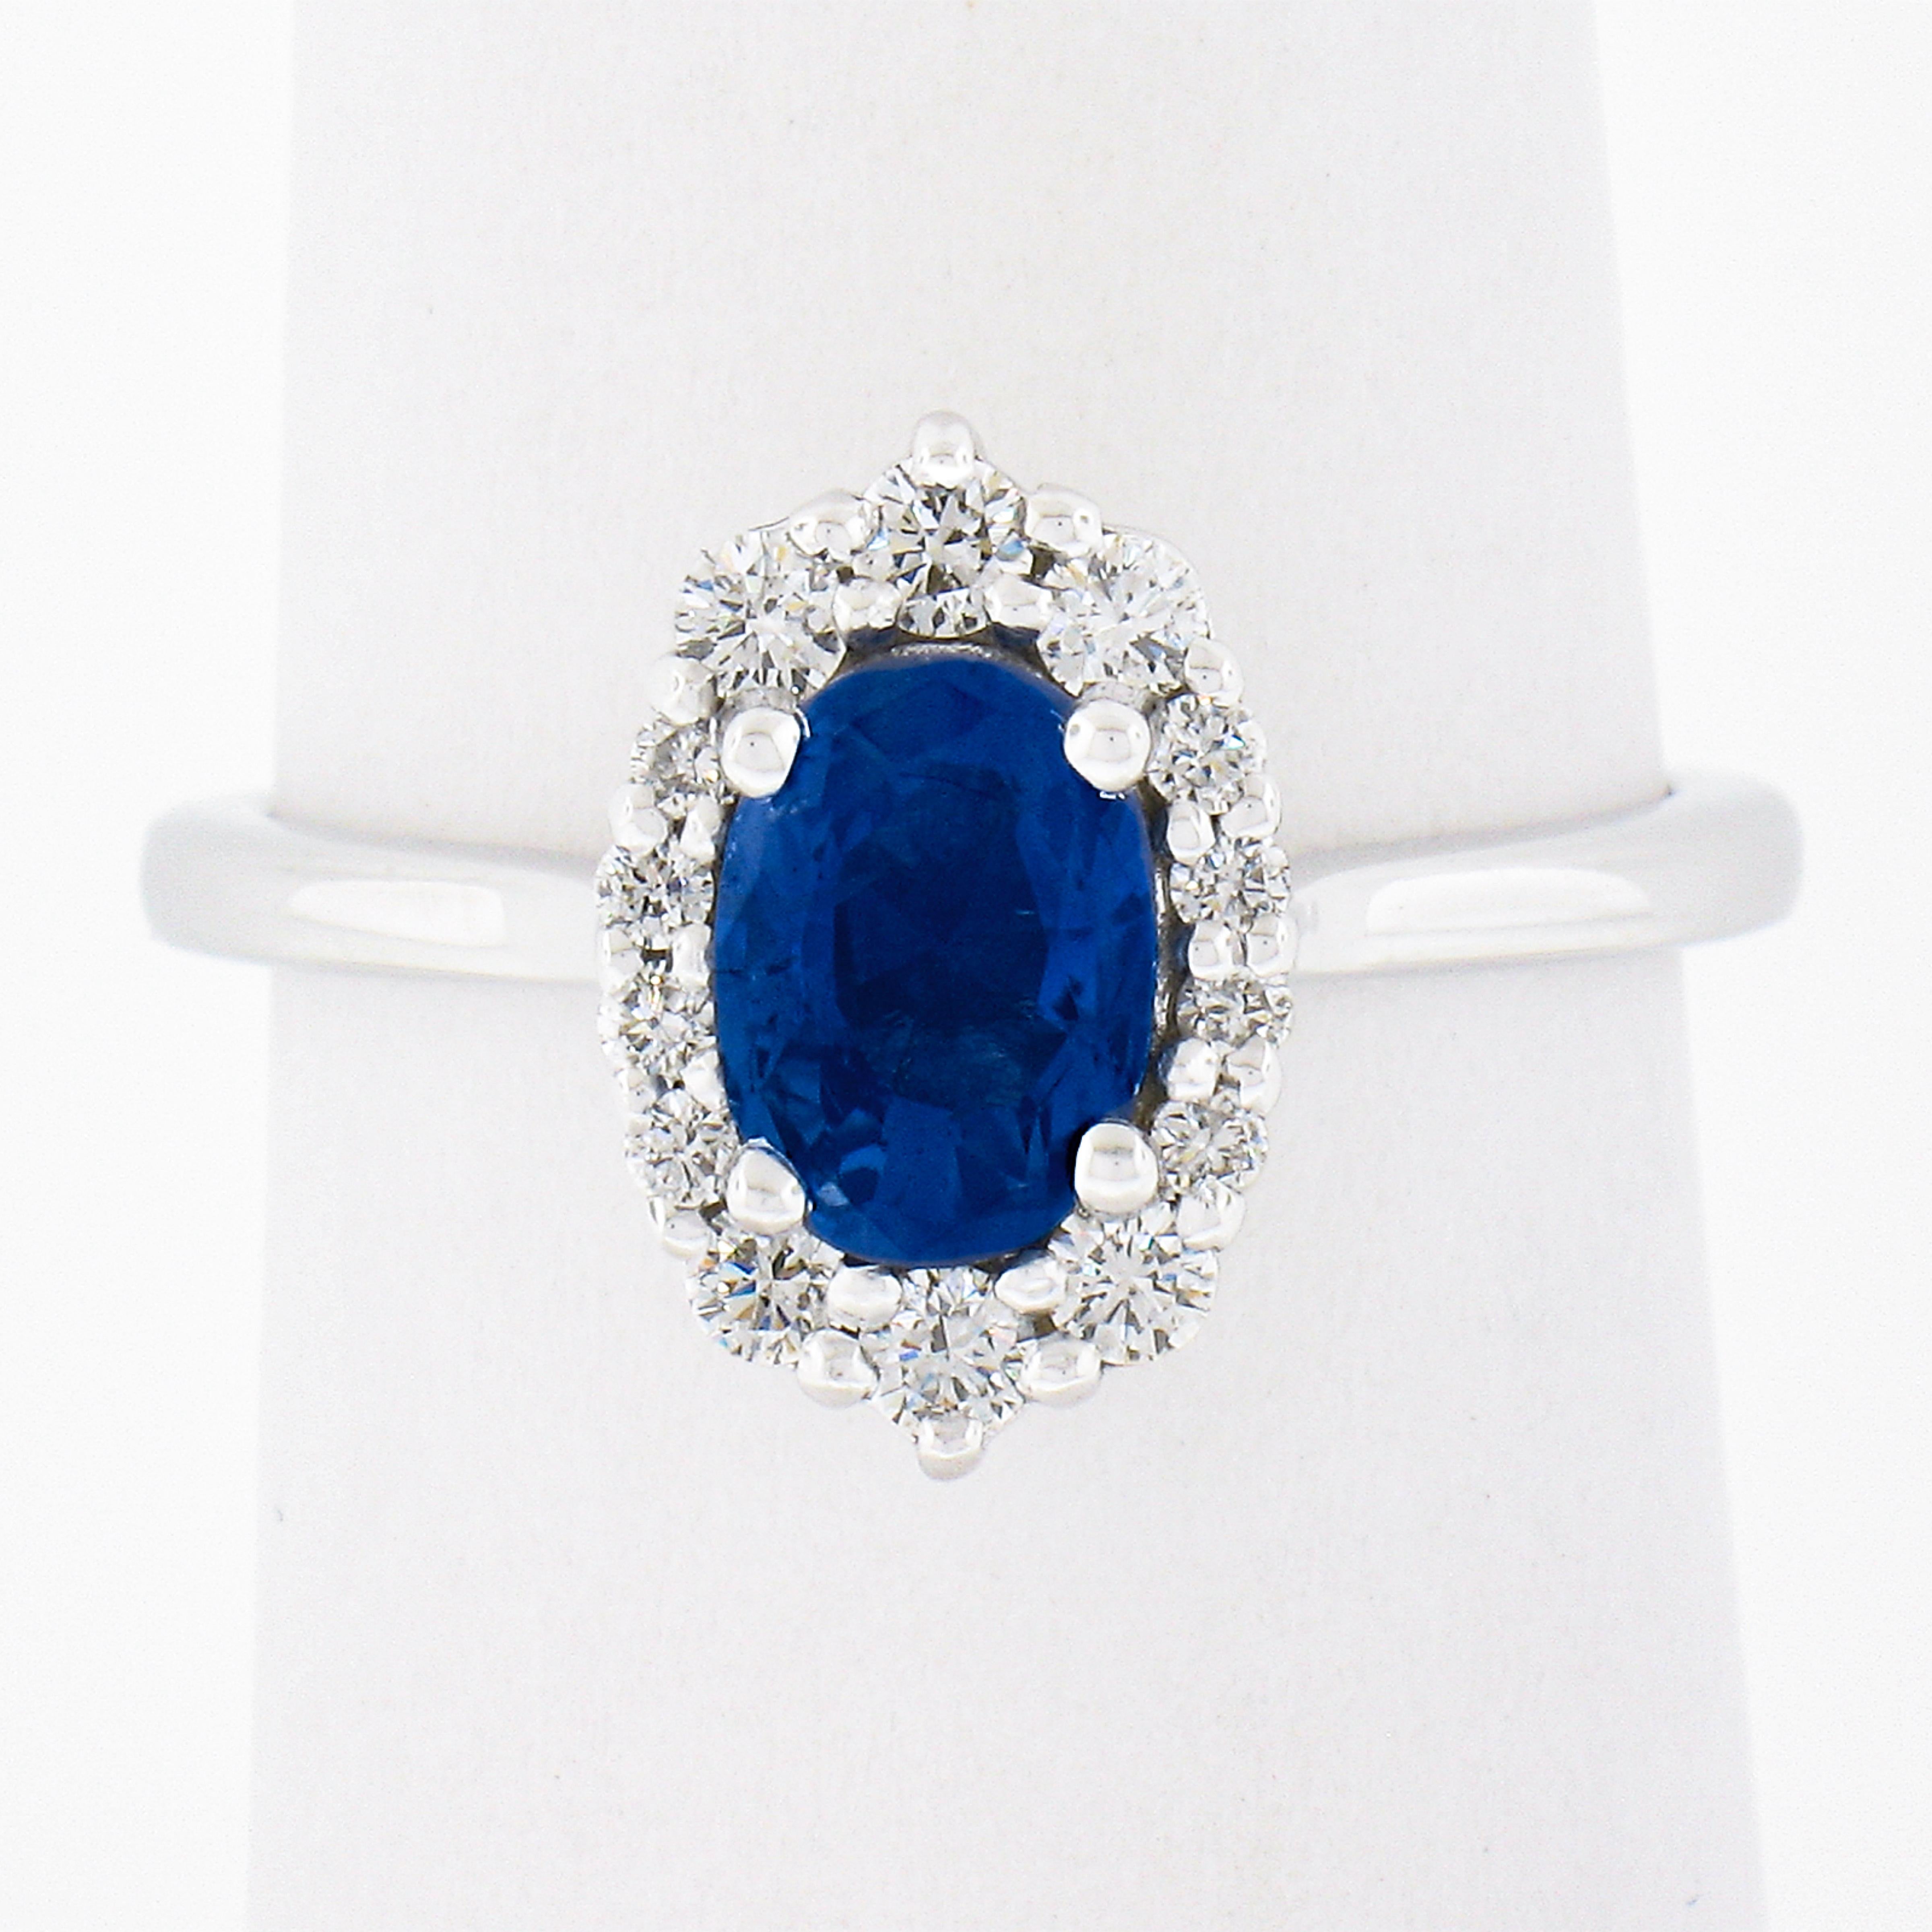 This truly breathtaking engagement or cocktail ring is newly crafted in solid 14k white gold and features a fine quality, GIA certified sapphire stone at its center. This 1.28 carat sapphire is then surrounded by a uniquely designed halo that is